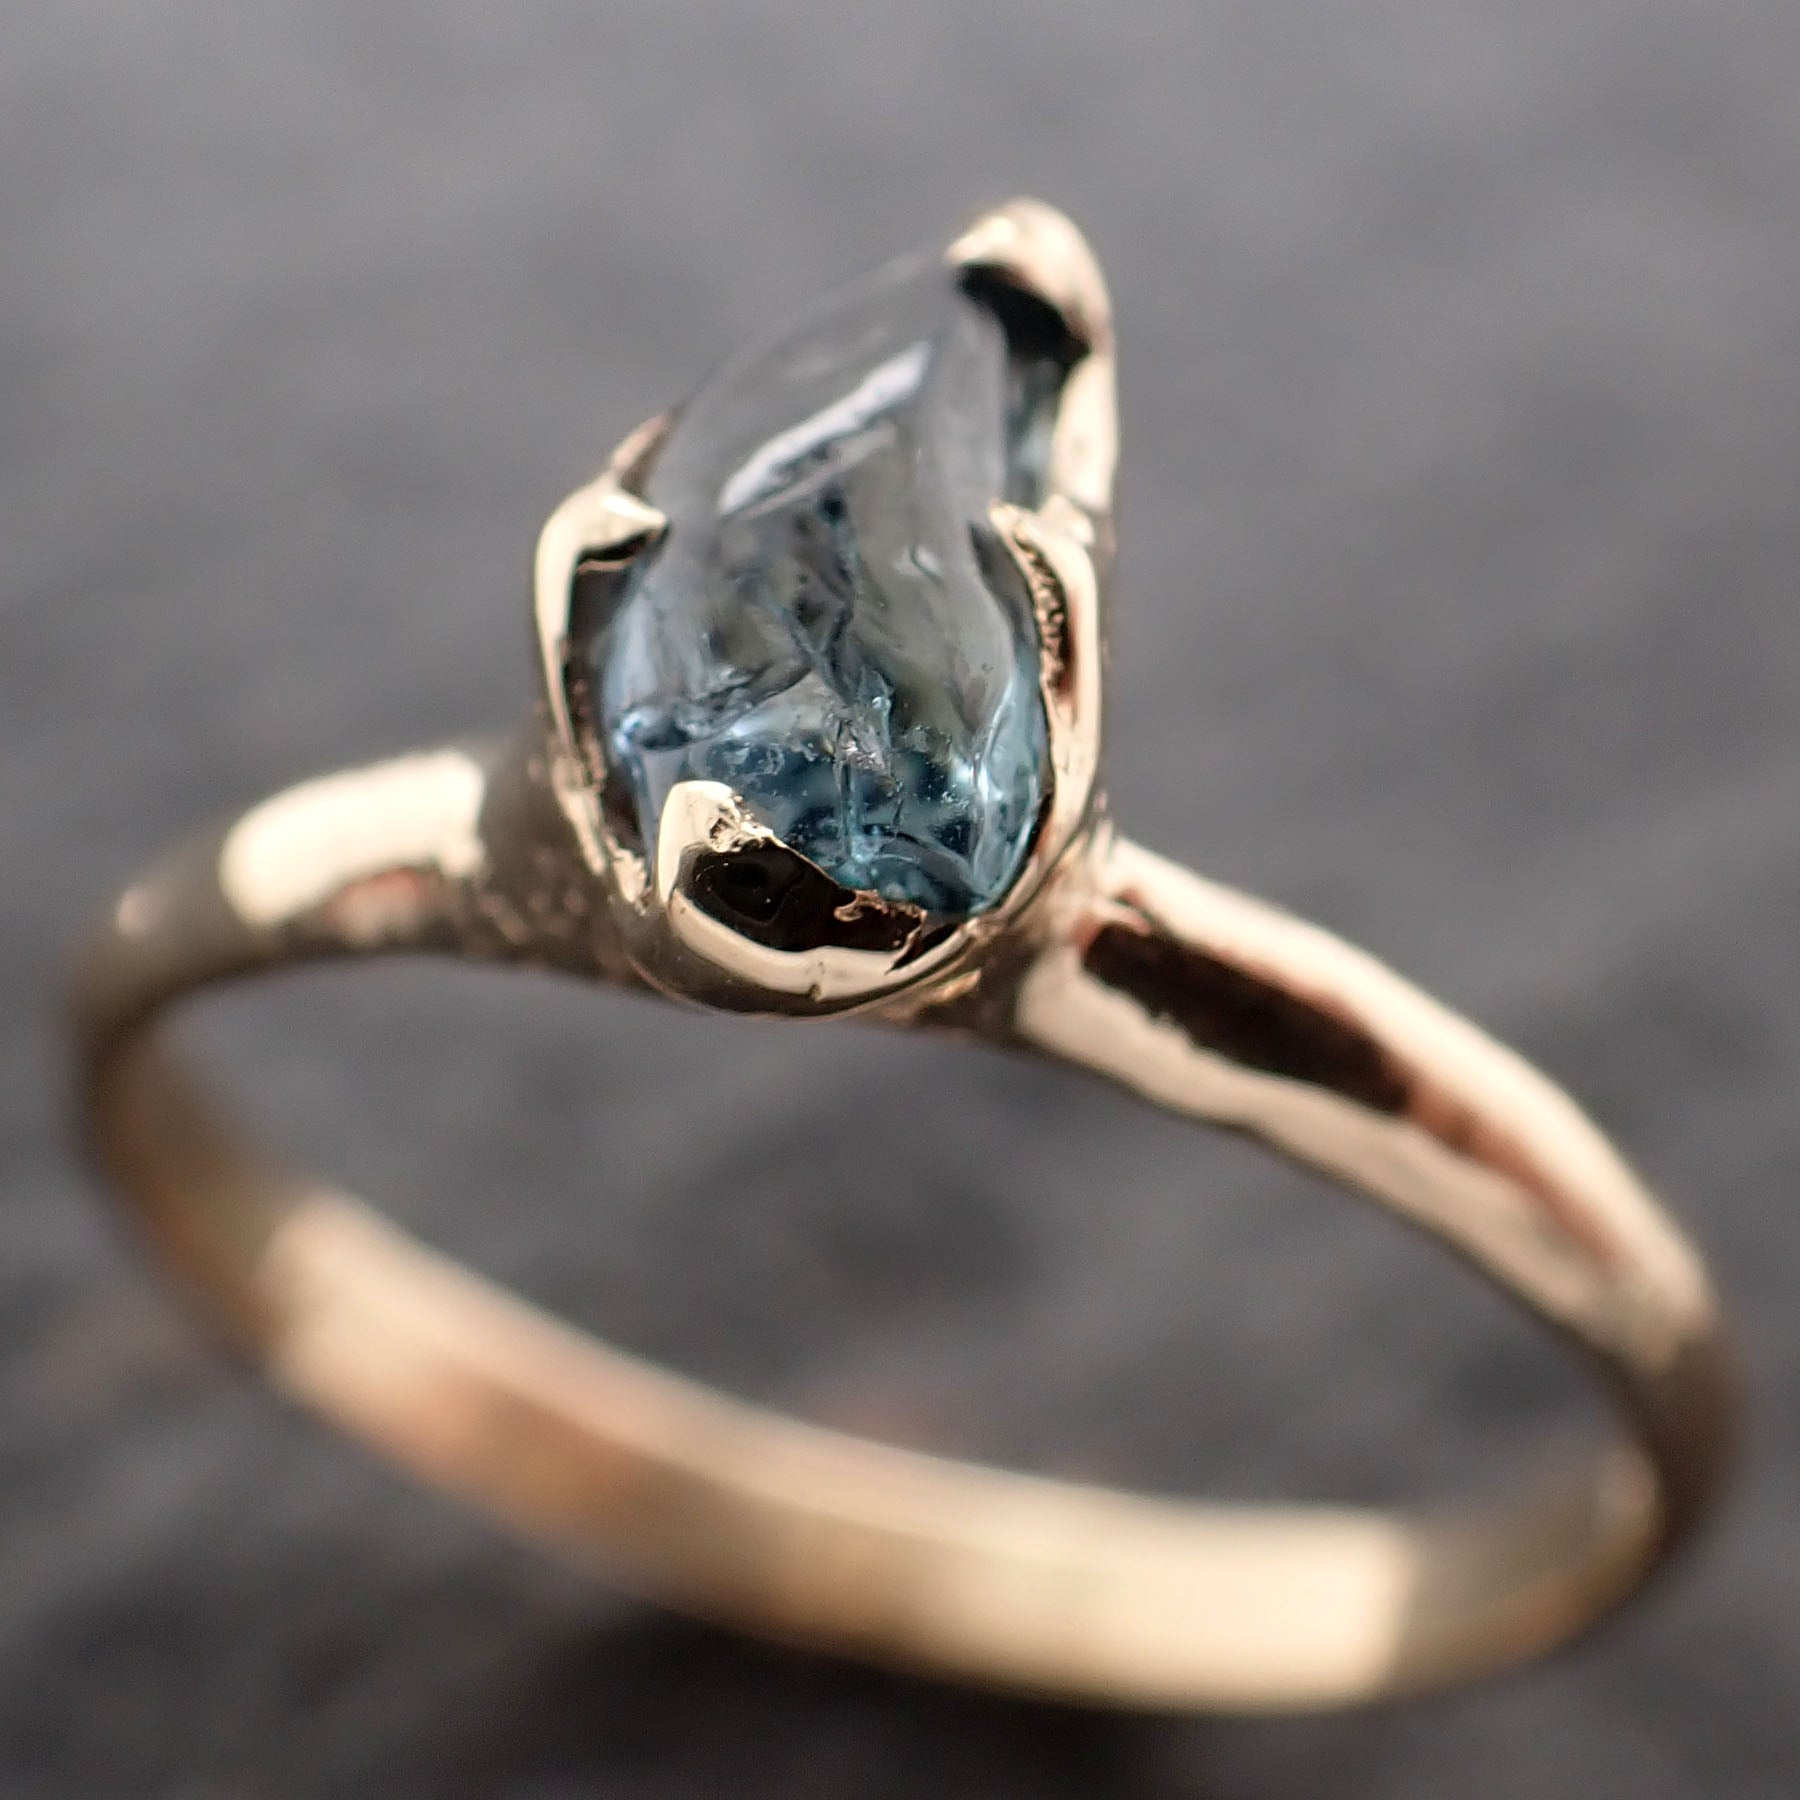 sapphire pebble blue candy polished 14k rose gold solitaire gemstone ring 2752 Alternative Engagement